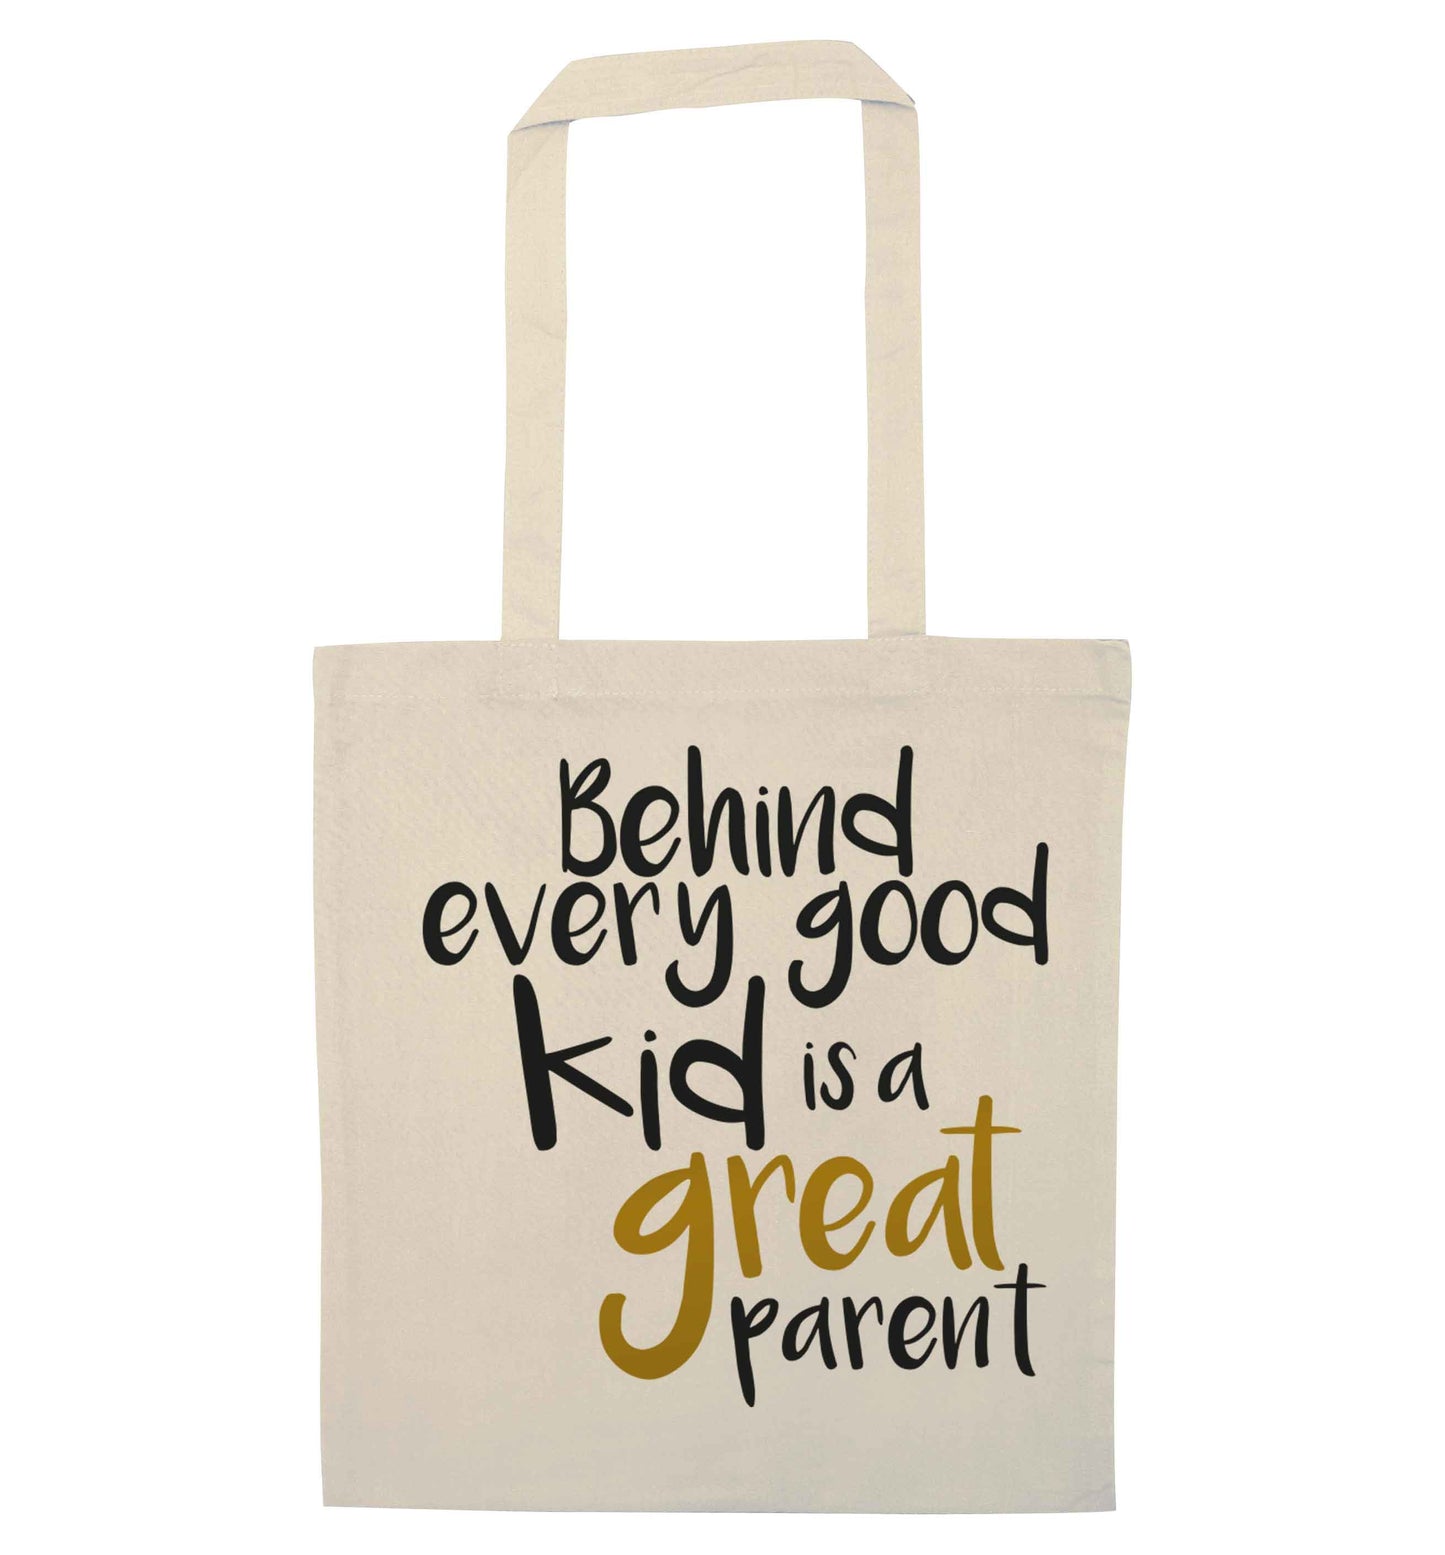 Behind every good kid is a great parent natural tote bag